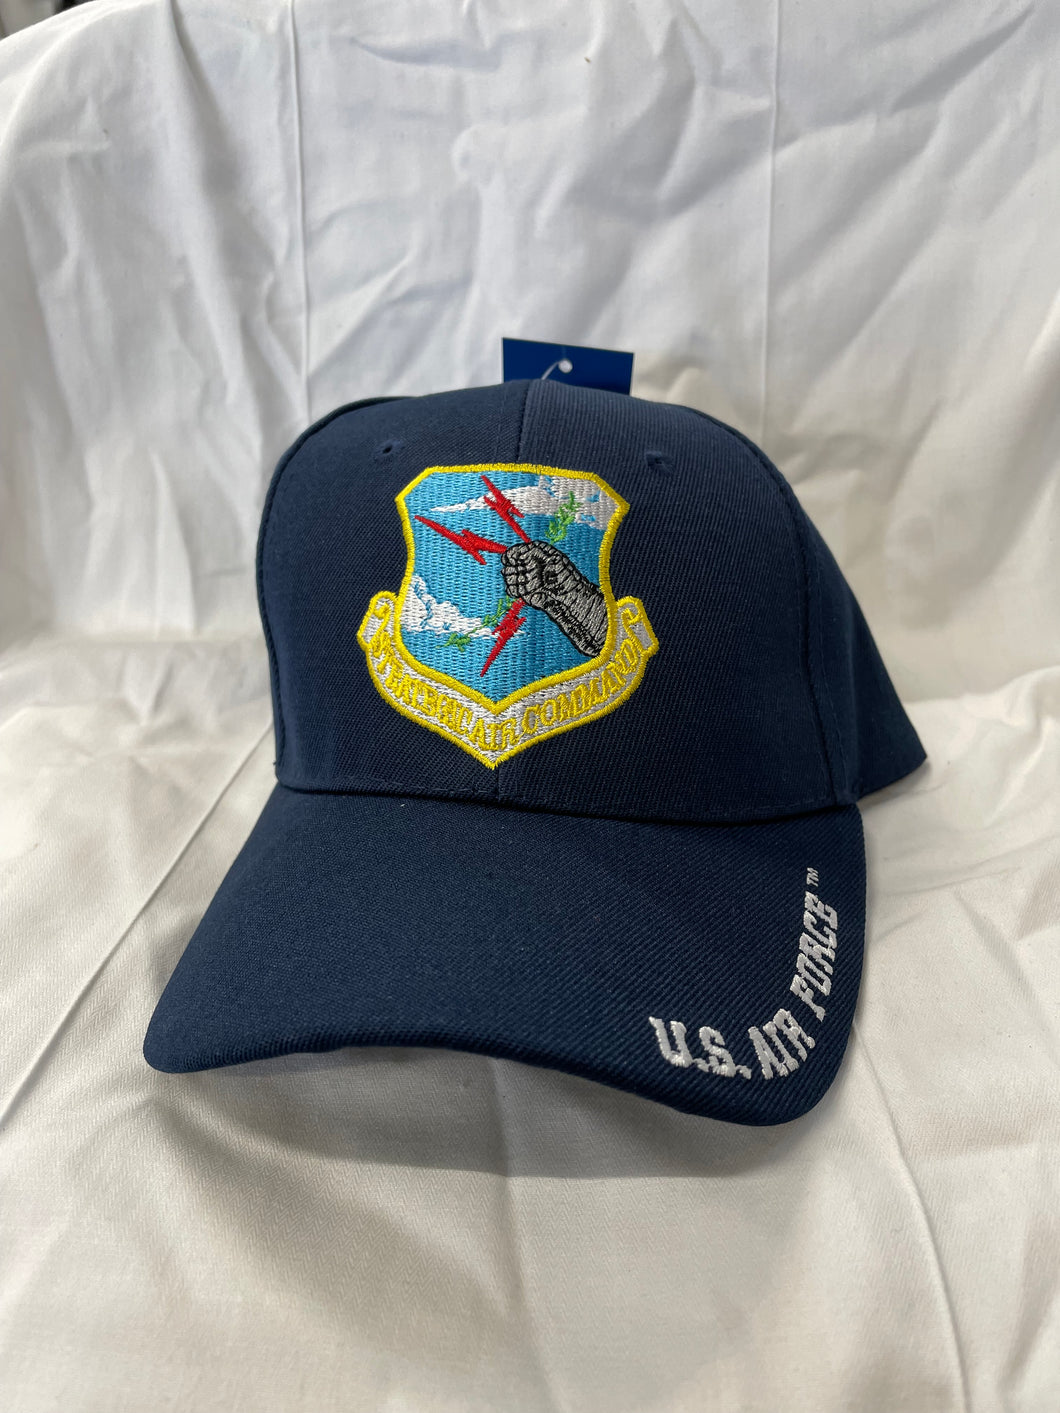 FRONT OF STRATEGIC AIR COMMAND HAT